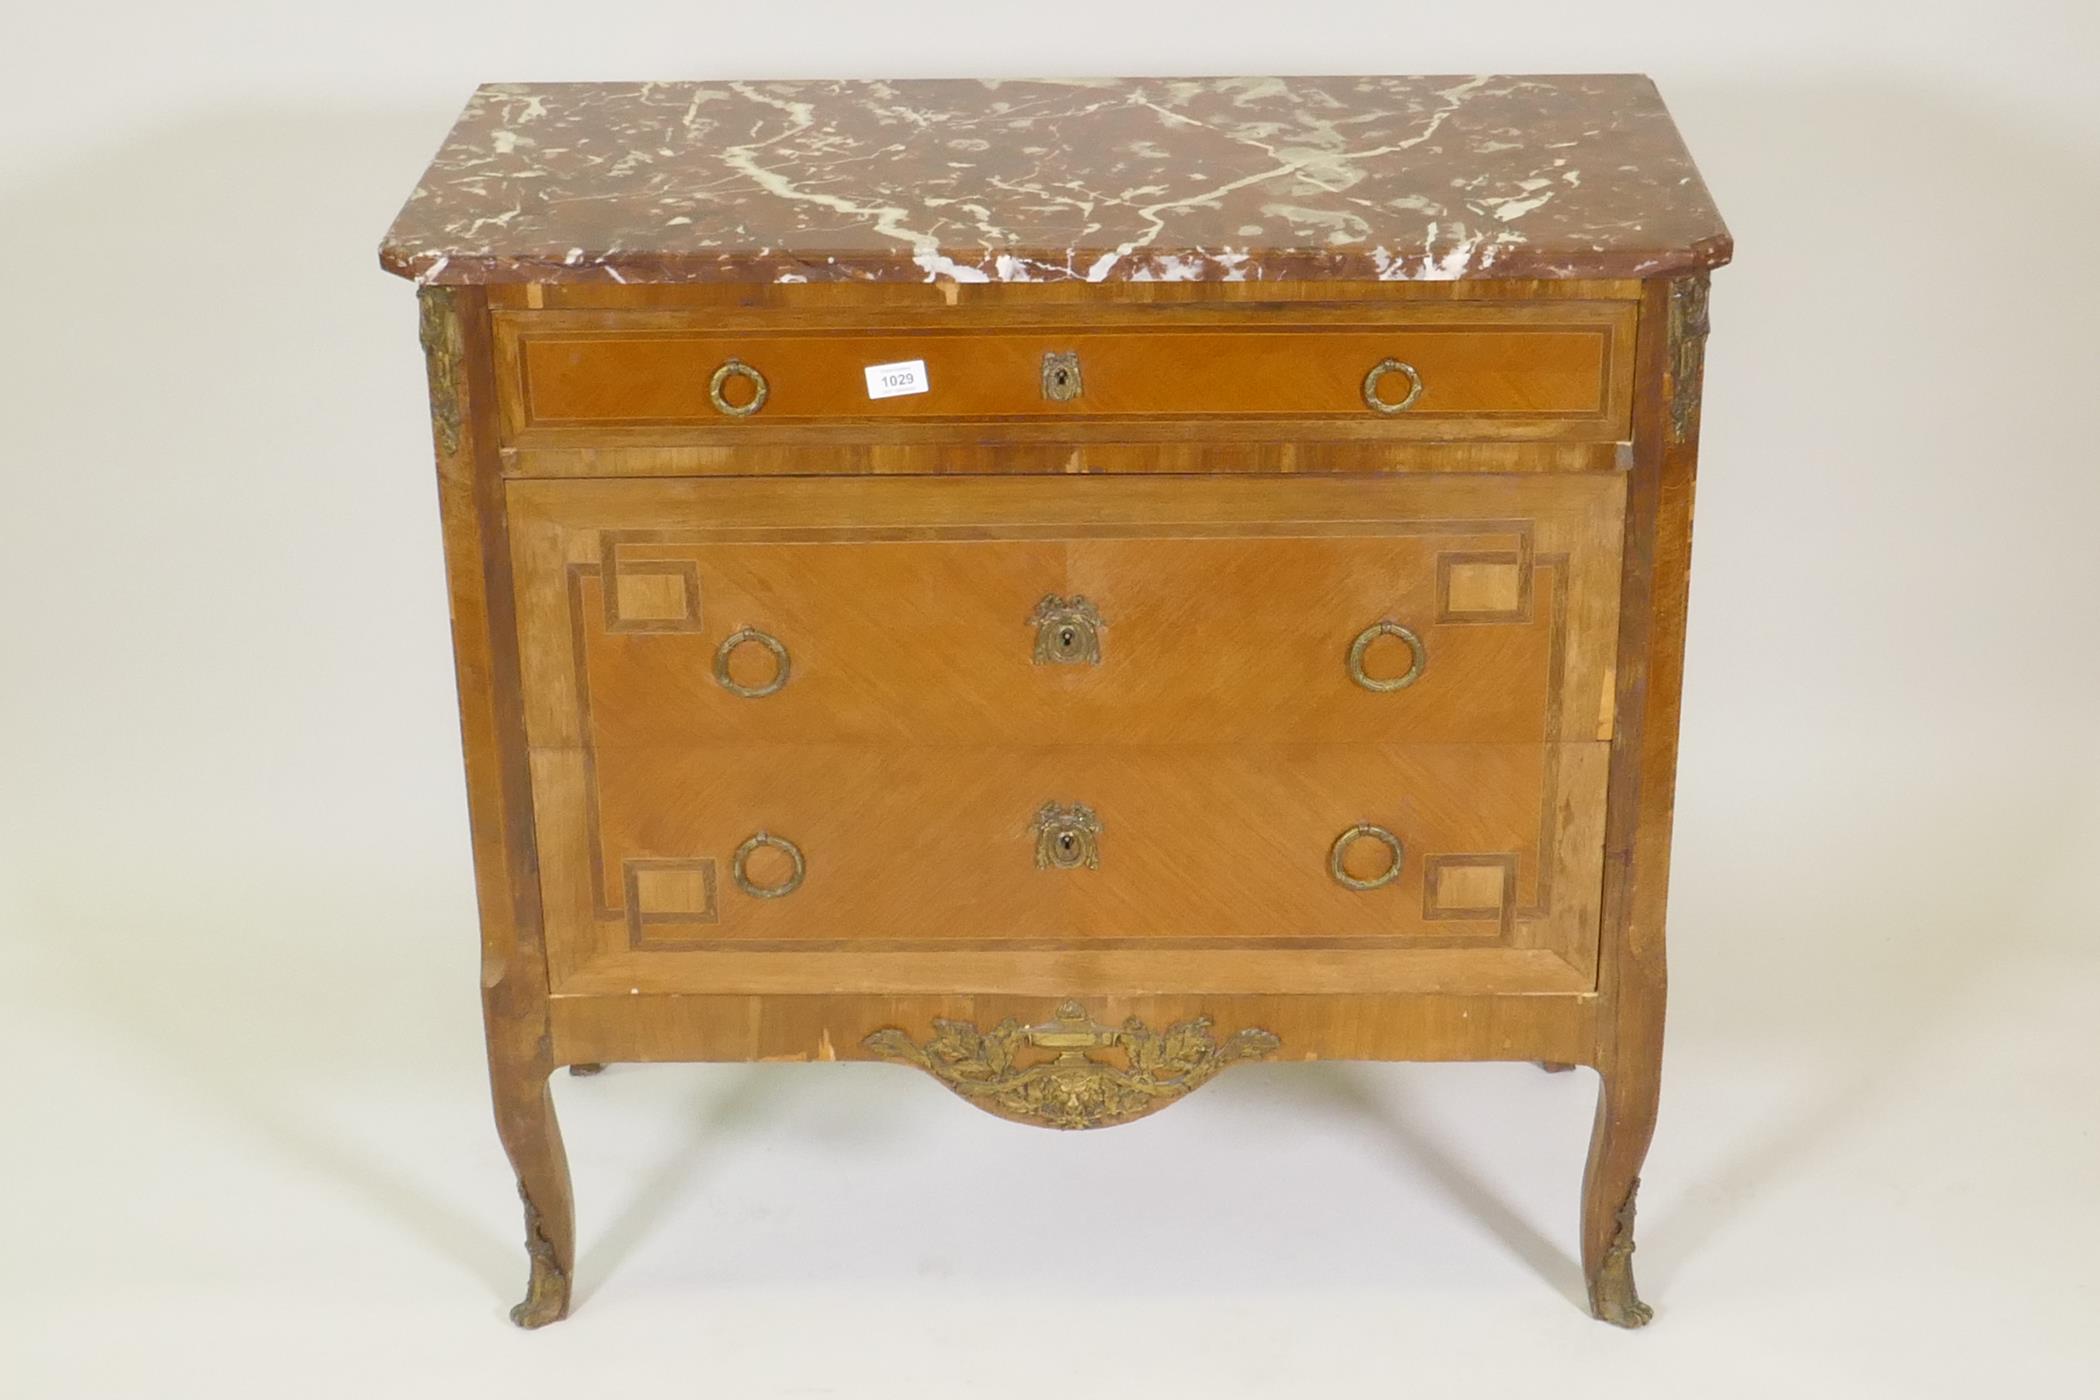 A French late C19th Louis XV style inlaid kingwood three drawer commode, with rouge marble top and - Image 2 of 4